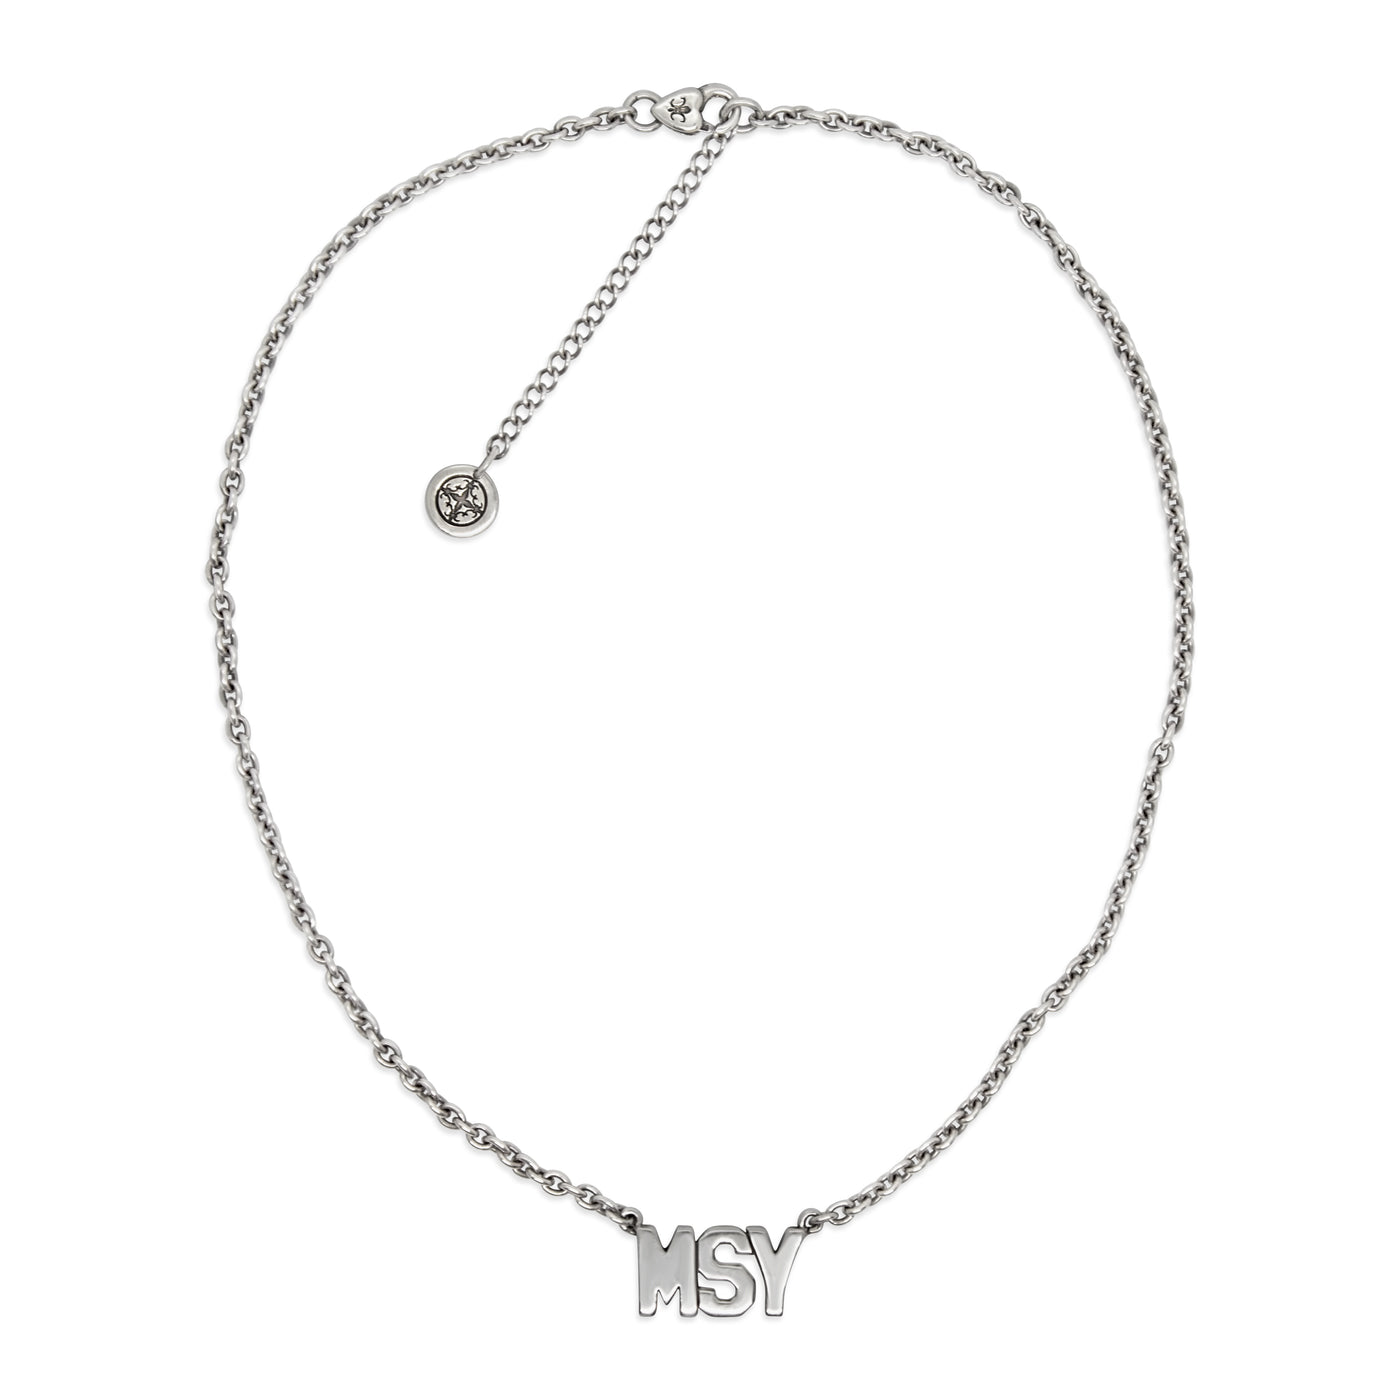 MSY International Airport Necklace